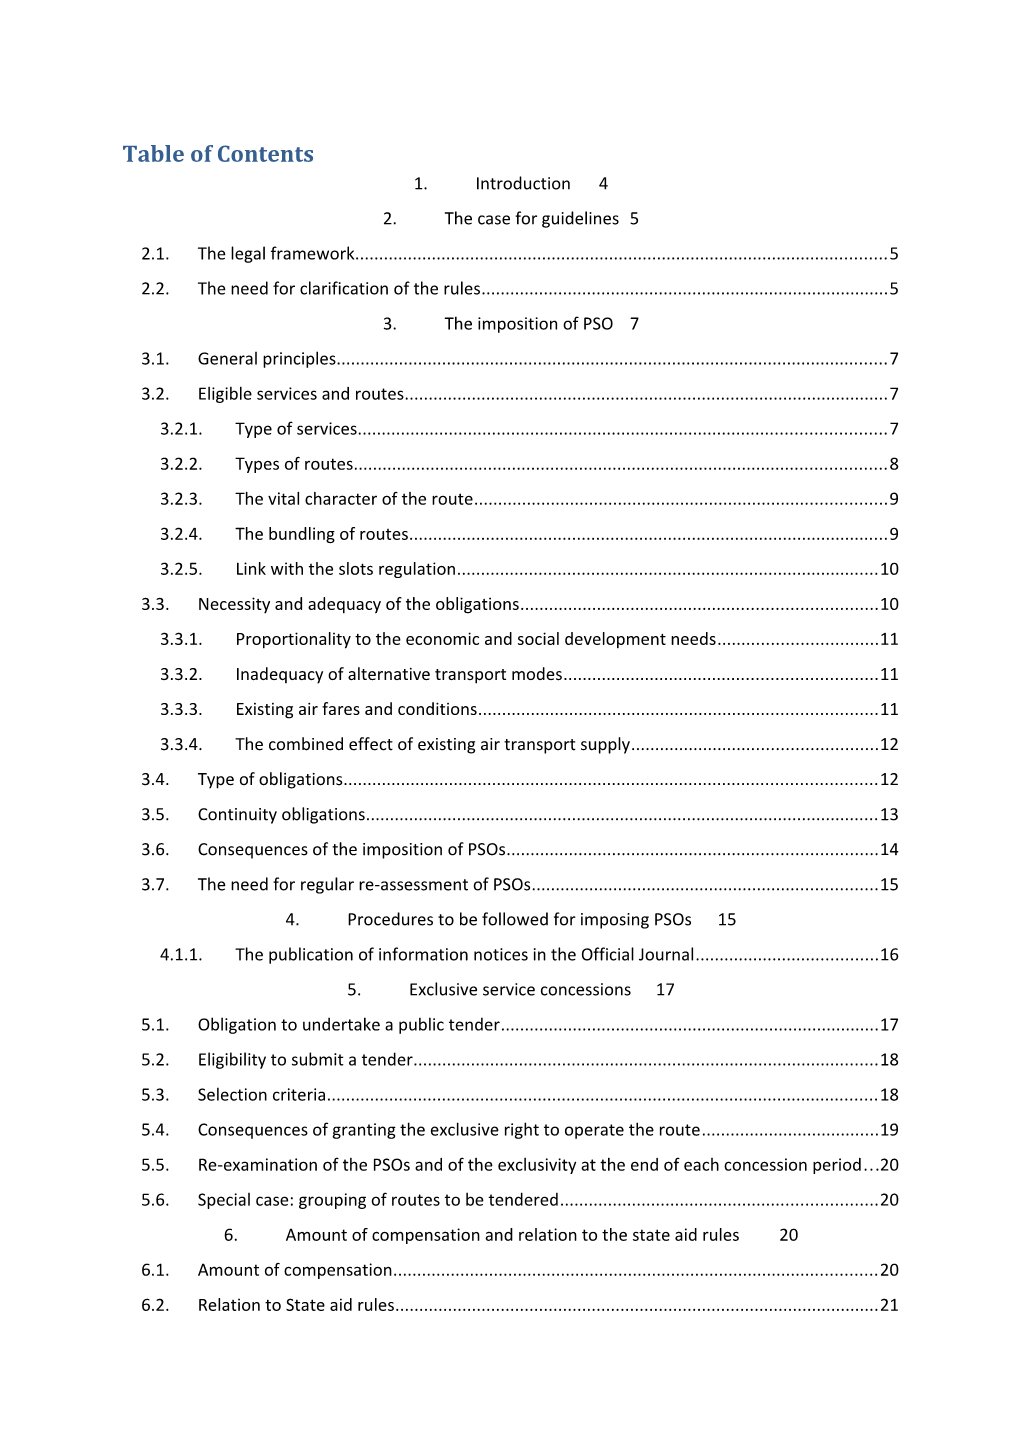 Table of Contents s456